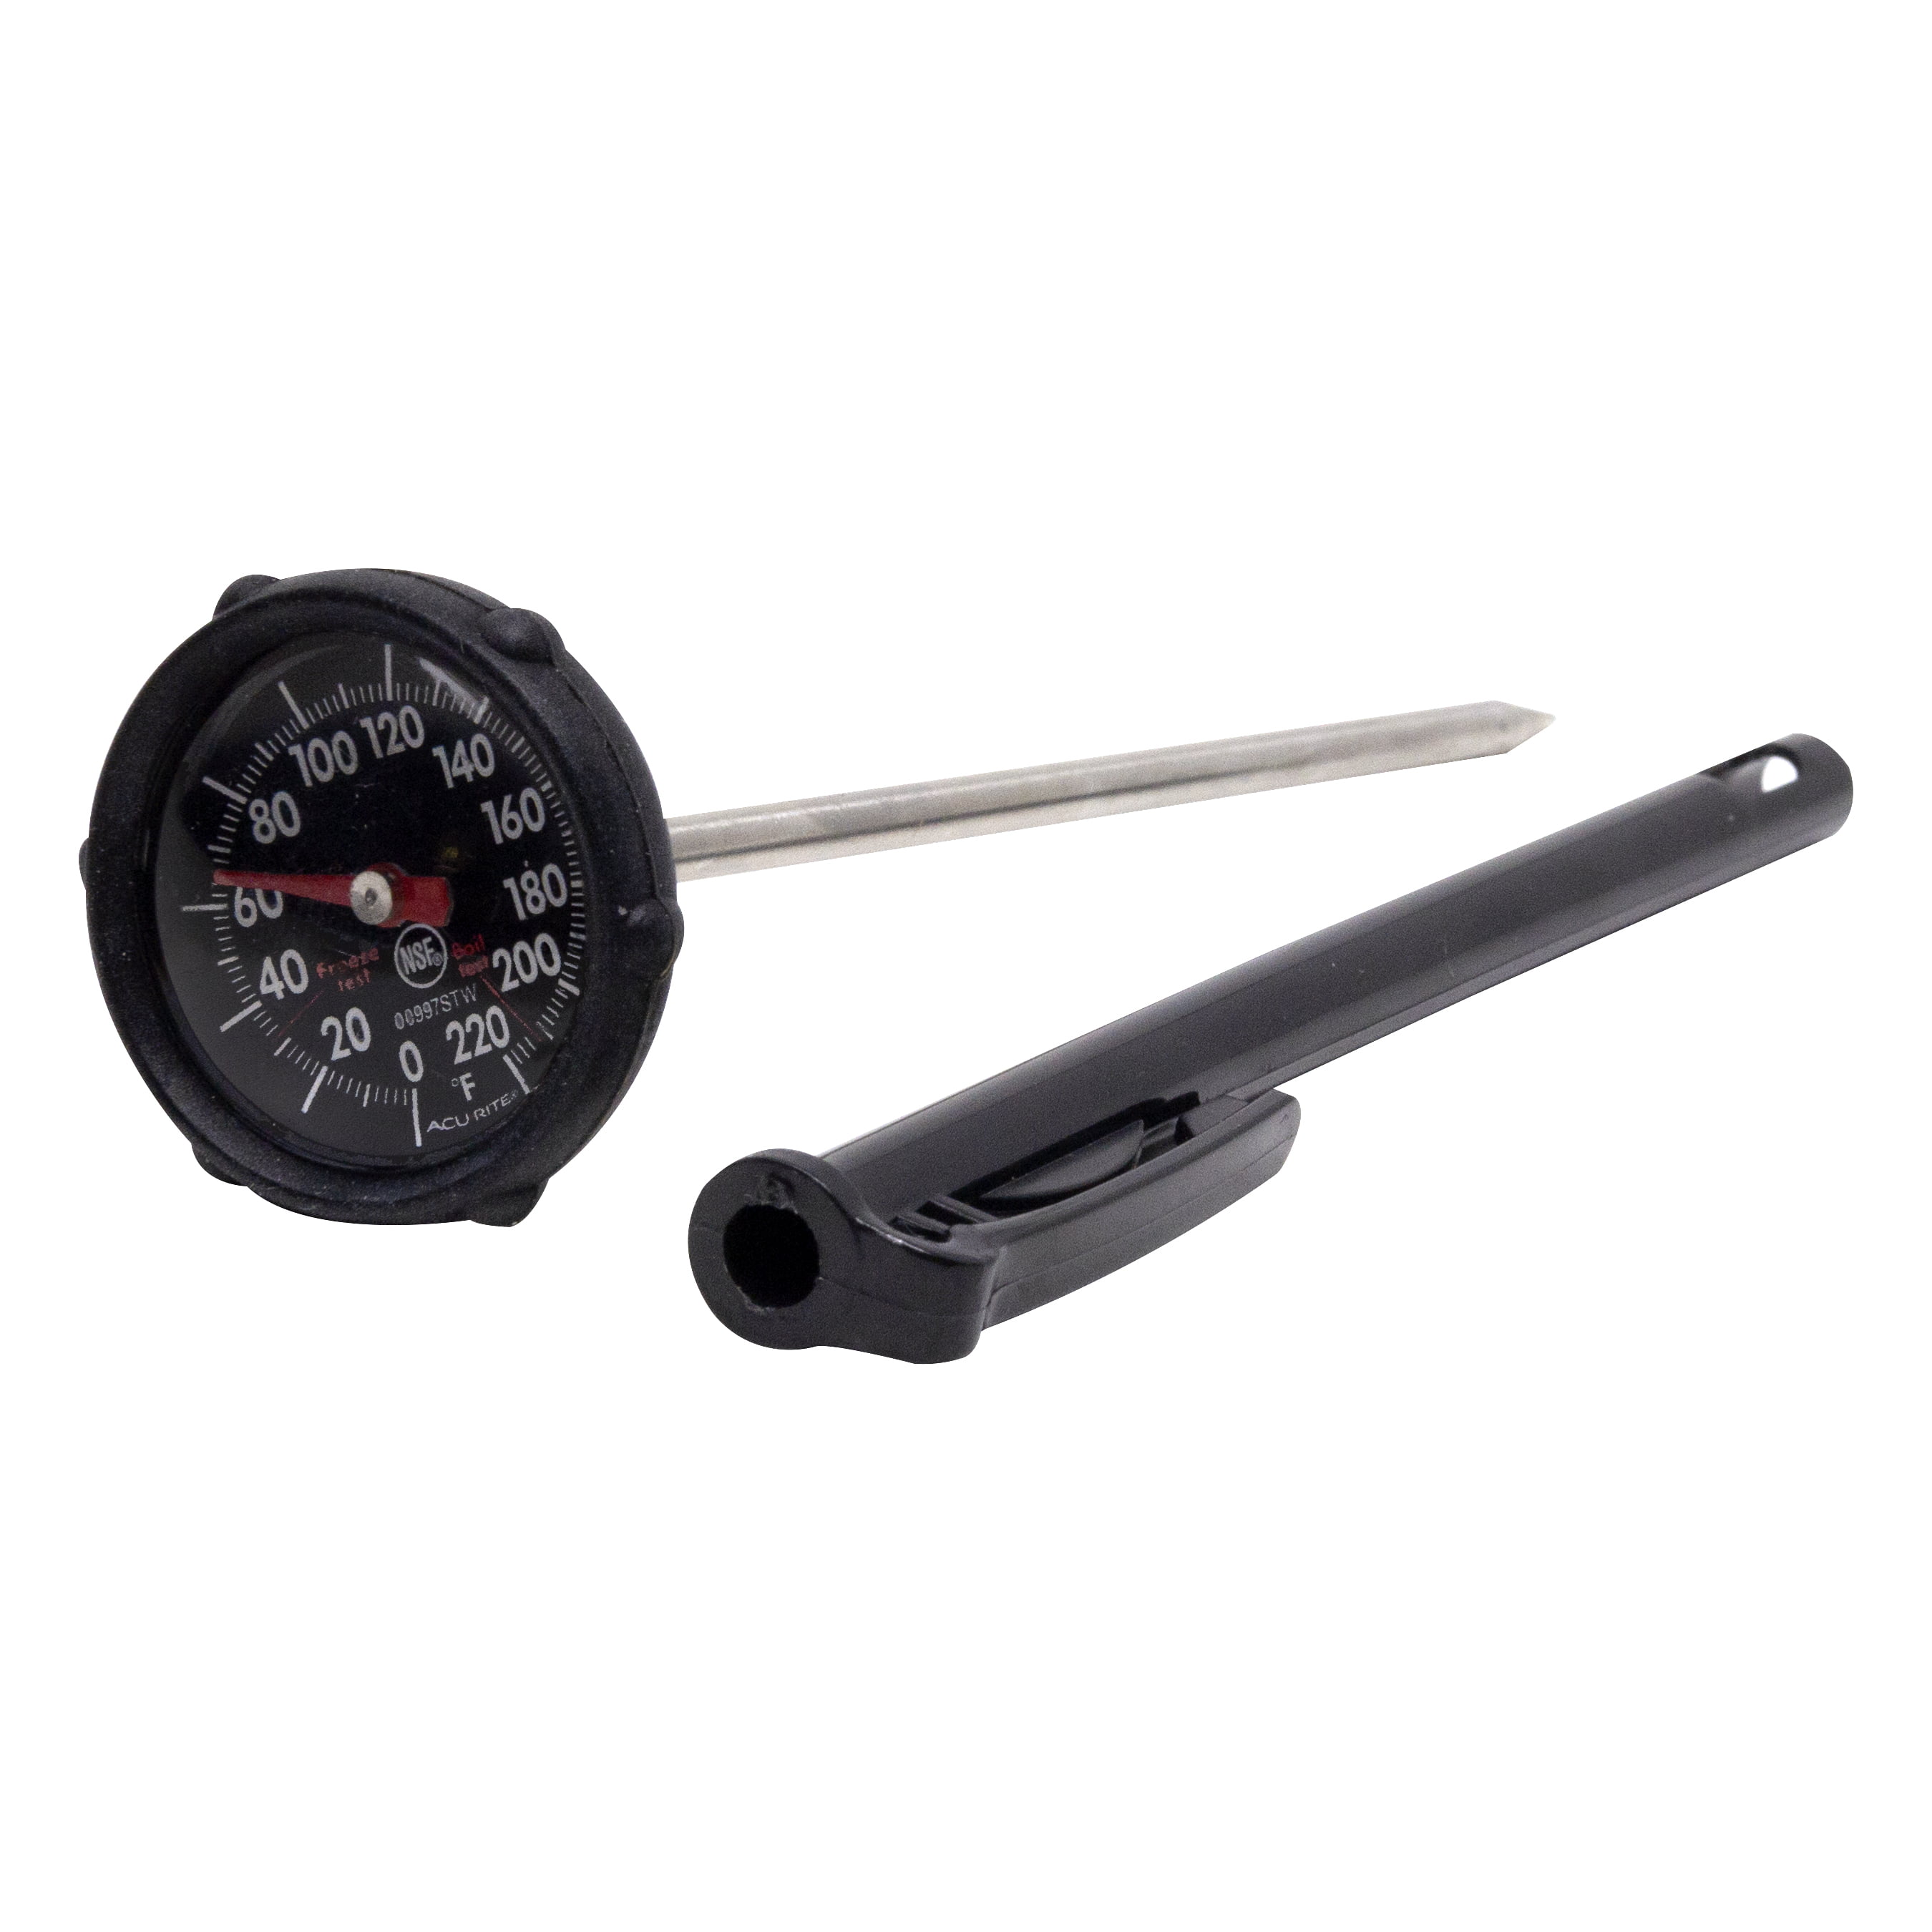  Mainstays NSF Certified Oven Safe Meat Thermometer